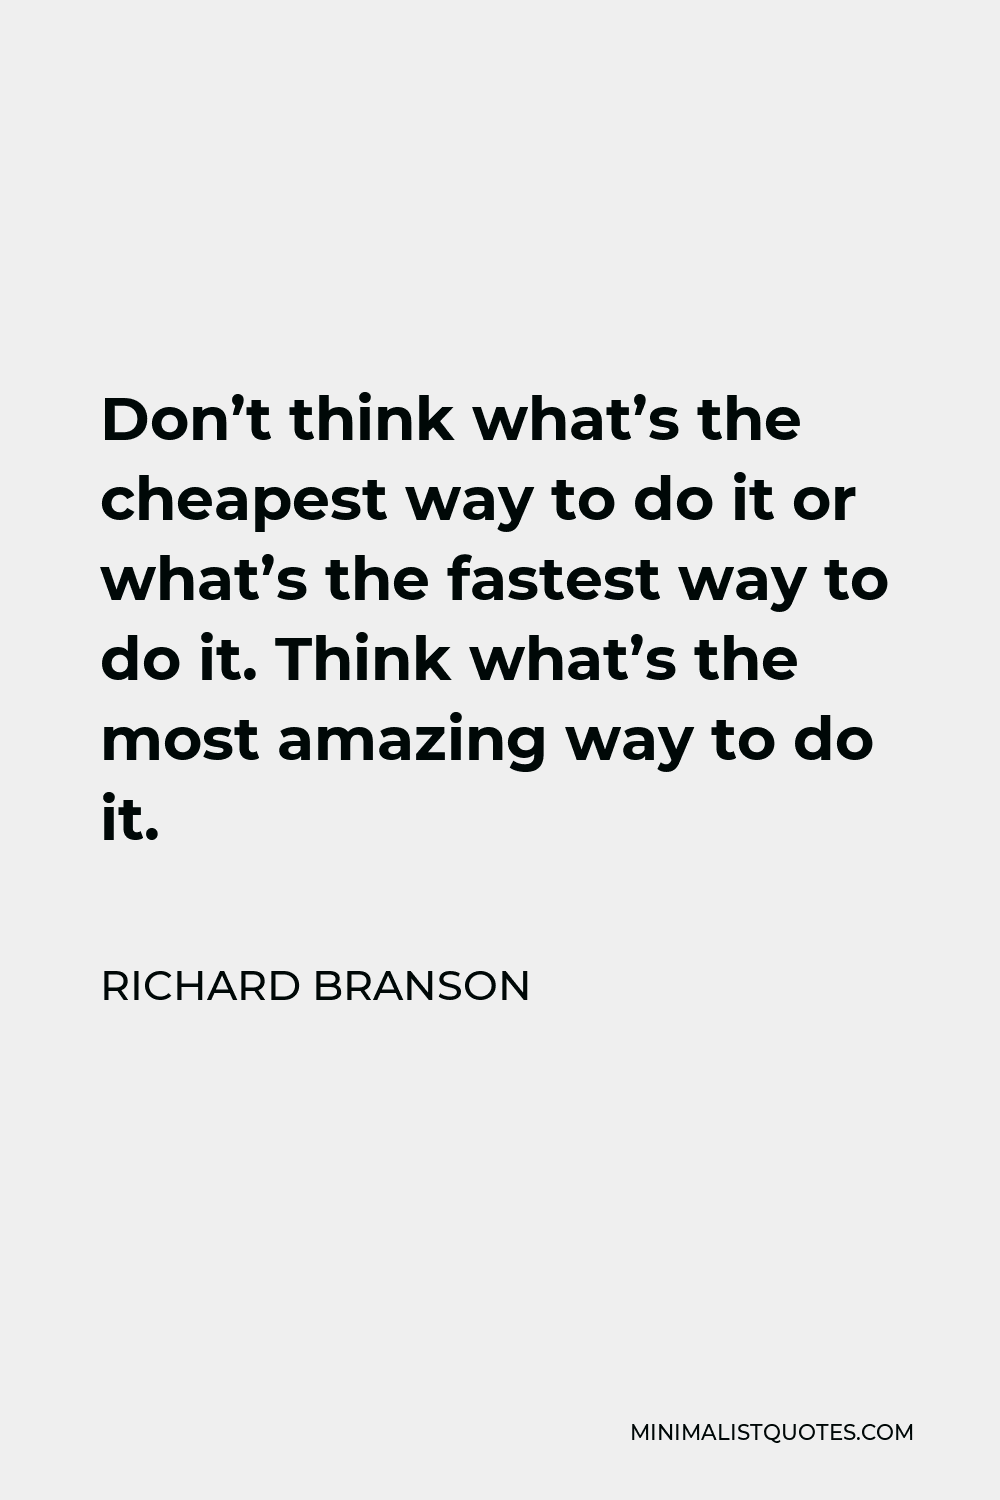 Richard Branson Quote - Don’t think what’s the cheapest way to do it or what’s the fastest way to do it. Think what’s the most amazing way to do it.